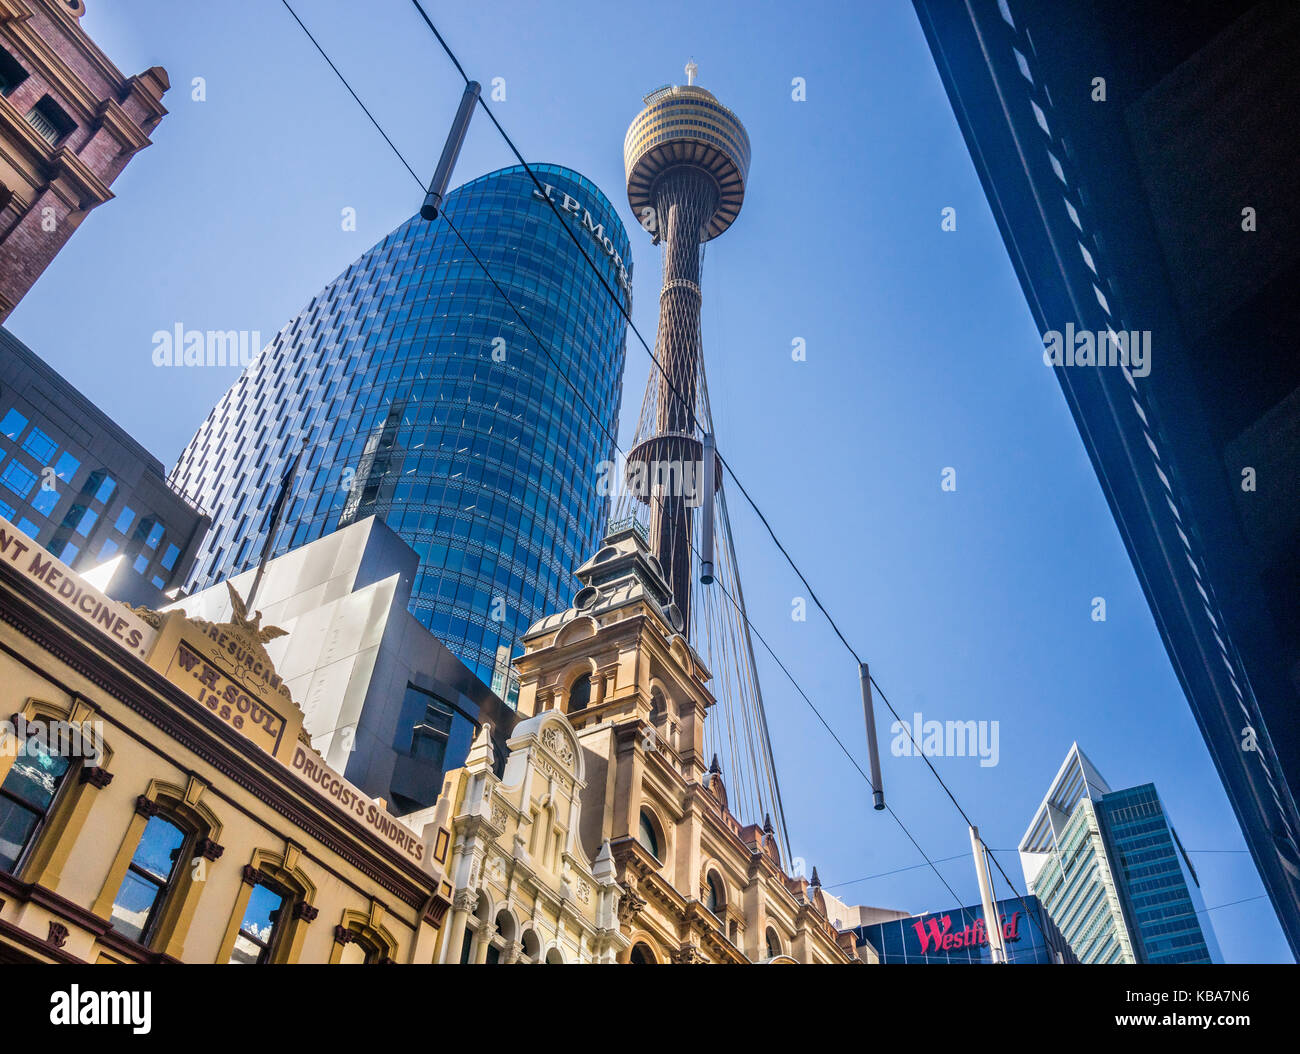 Australia, New South Wales, Sydney, view of Sydney Tower from Pitt Street, with 309 metres Sydney's tallest structure Stock Photo